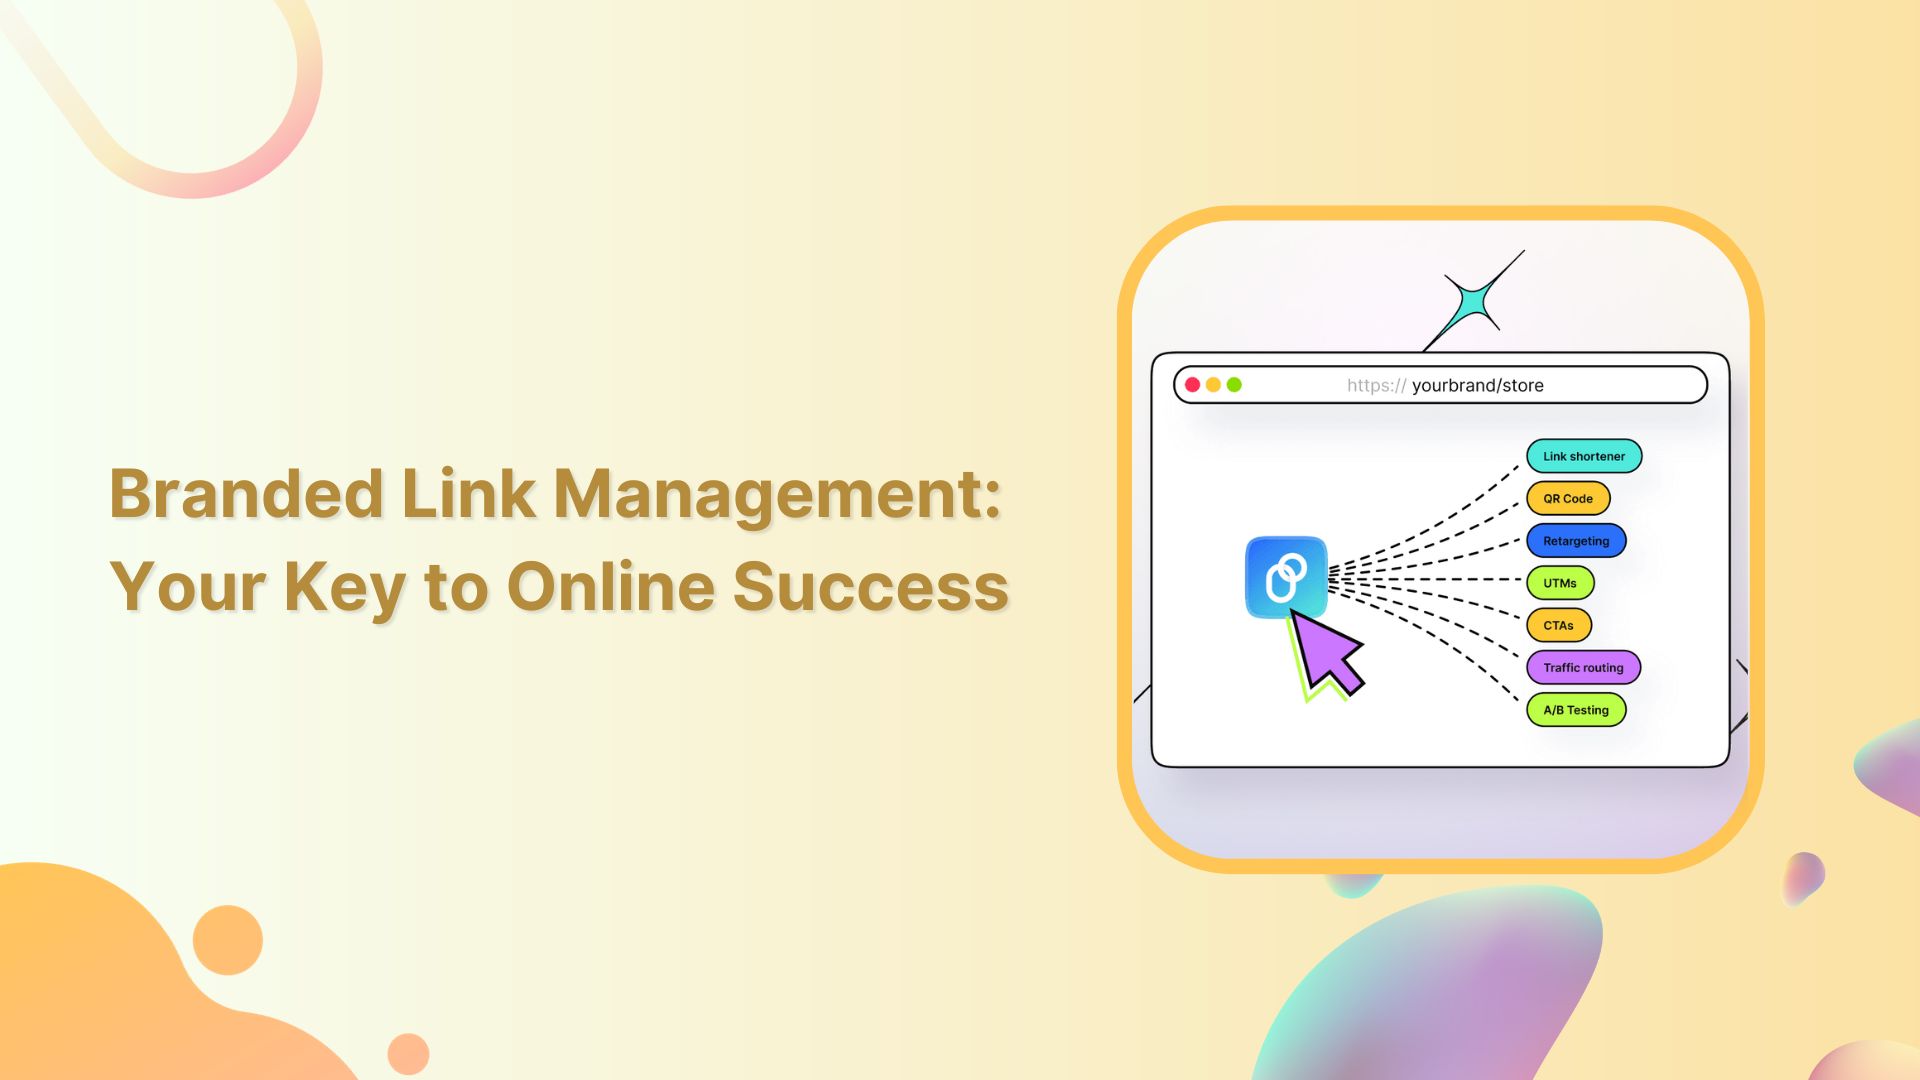 Branded Link Management: Your Key to Online Success